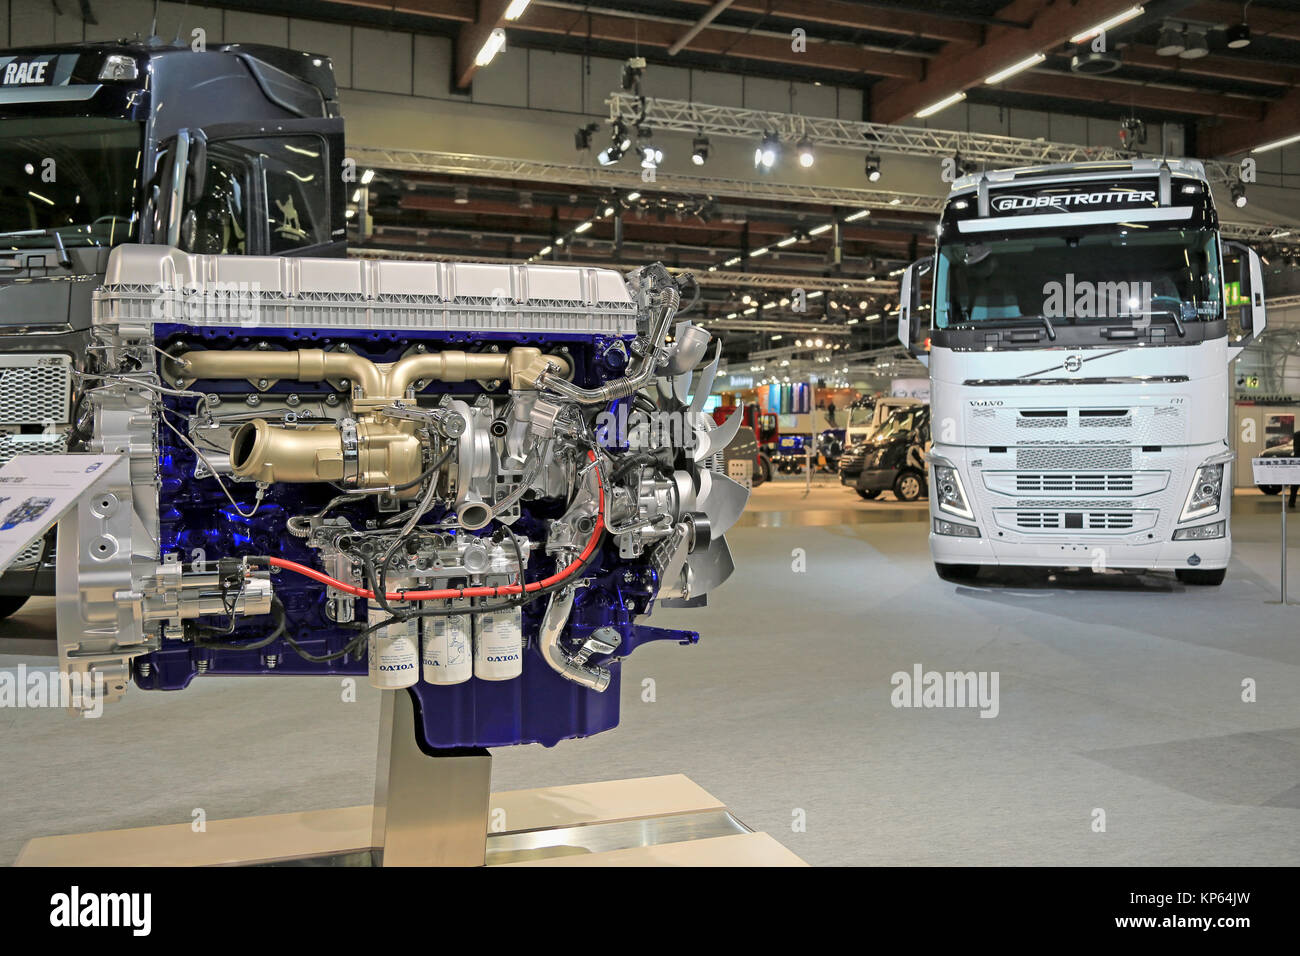 Raasepori, Finland. May 27, 2021. Volvo Trucks Finland presents new Volvo  FMX 540 Xpro Winter as part of their new range Stock Photo - Alamy